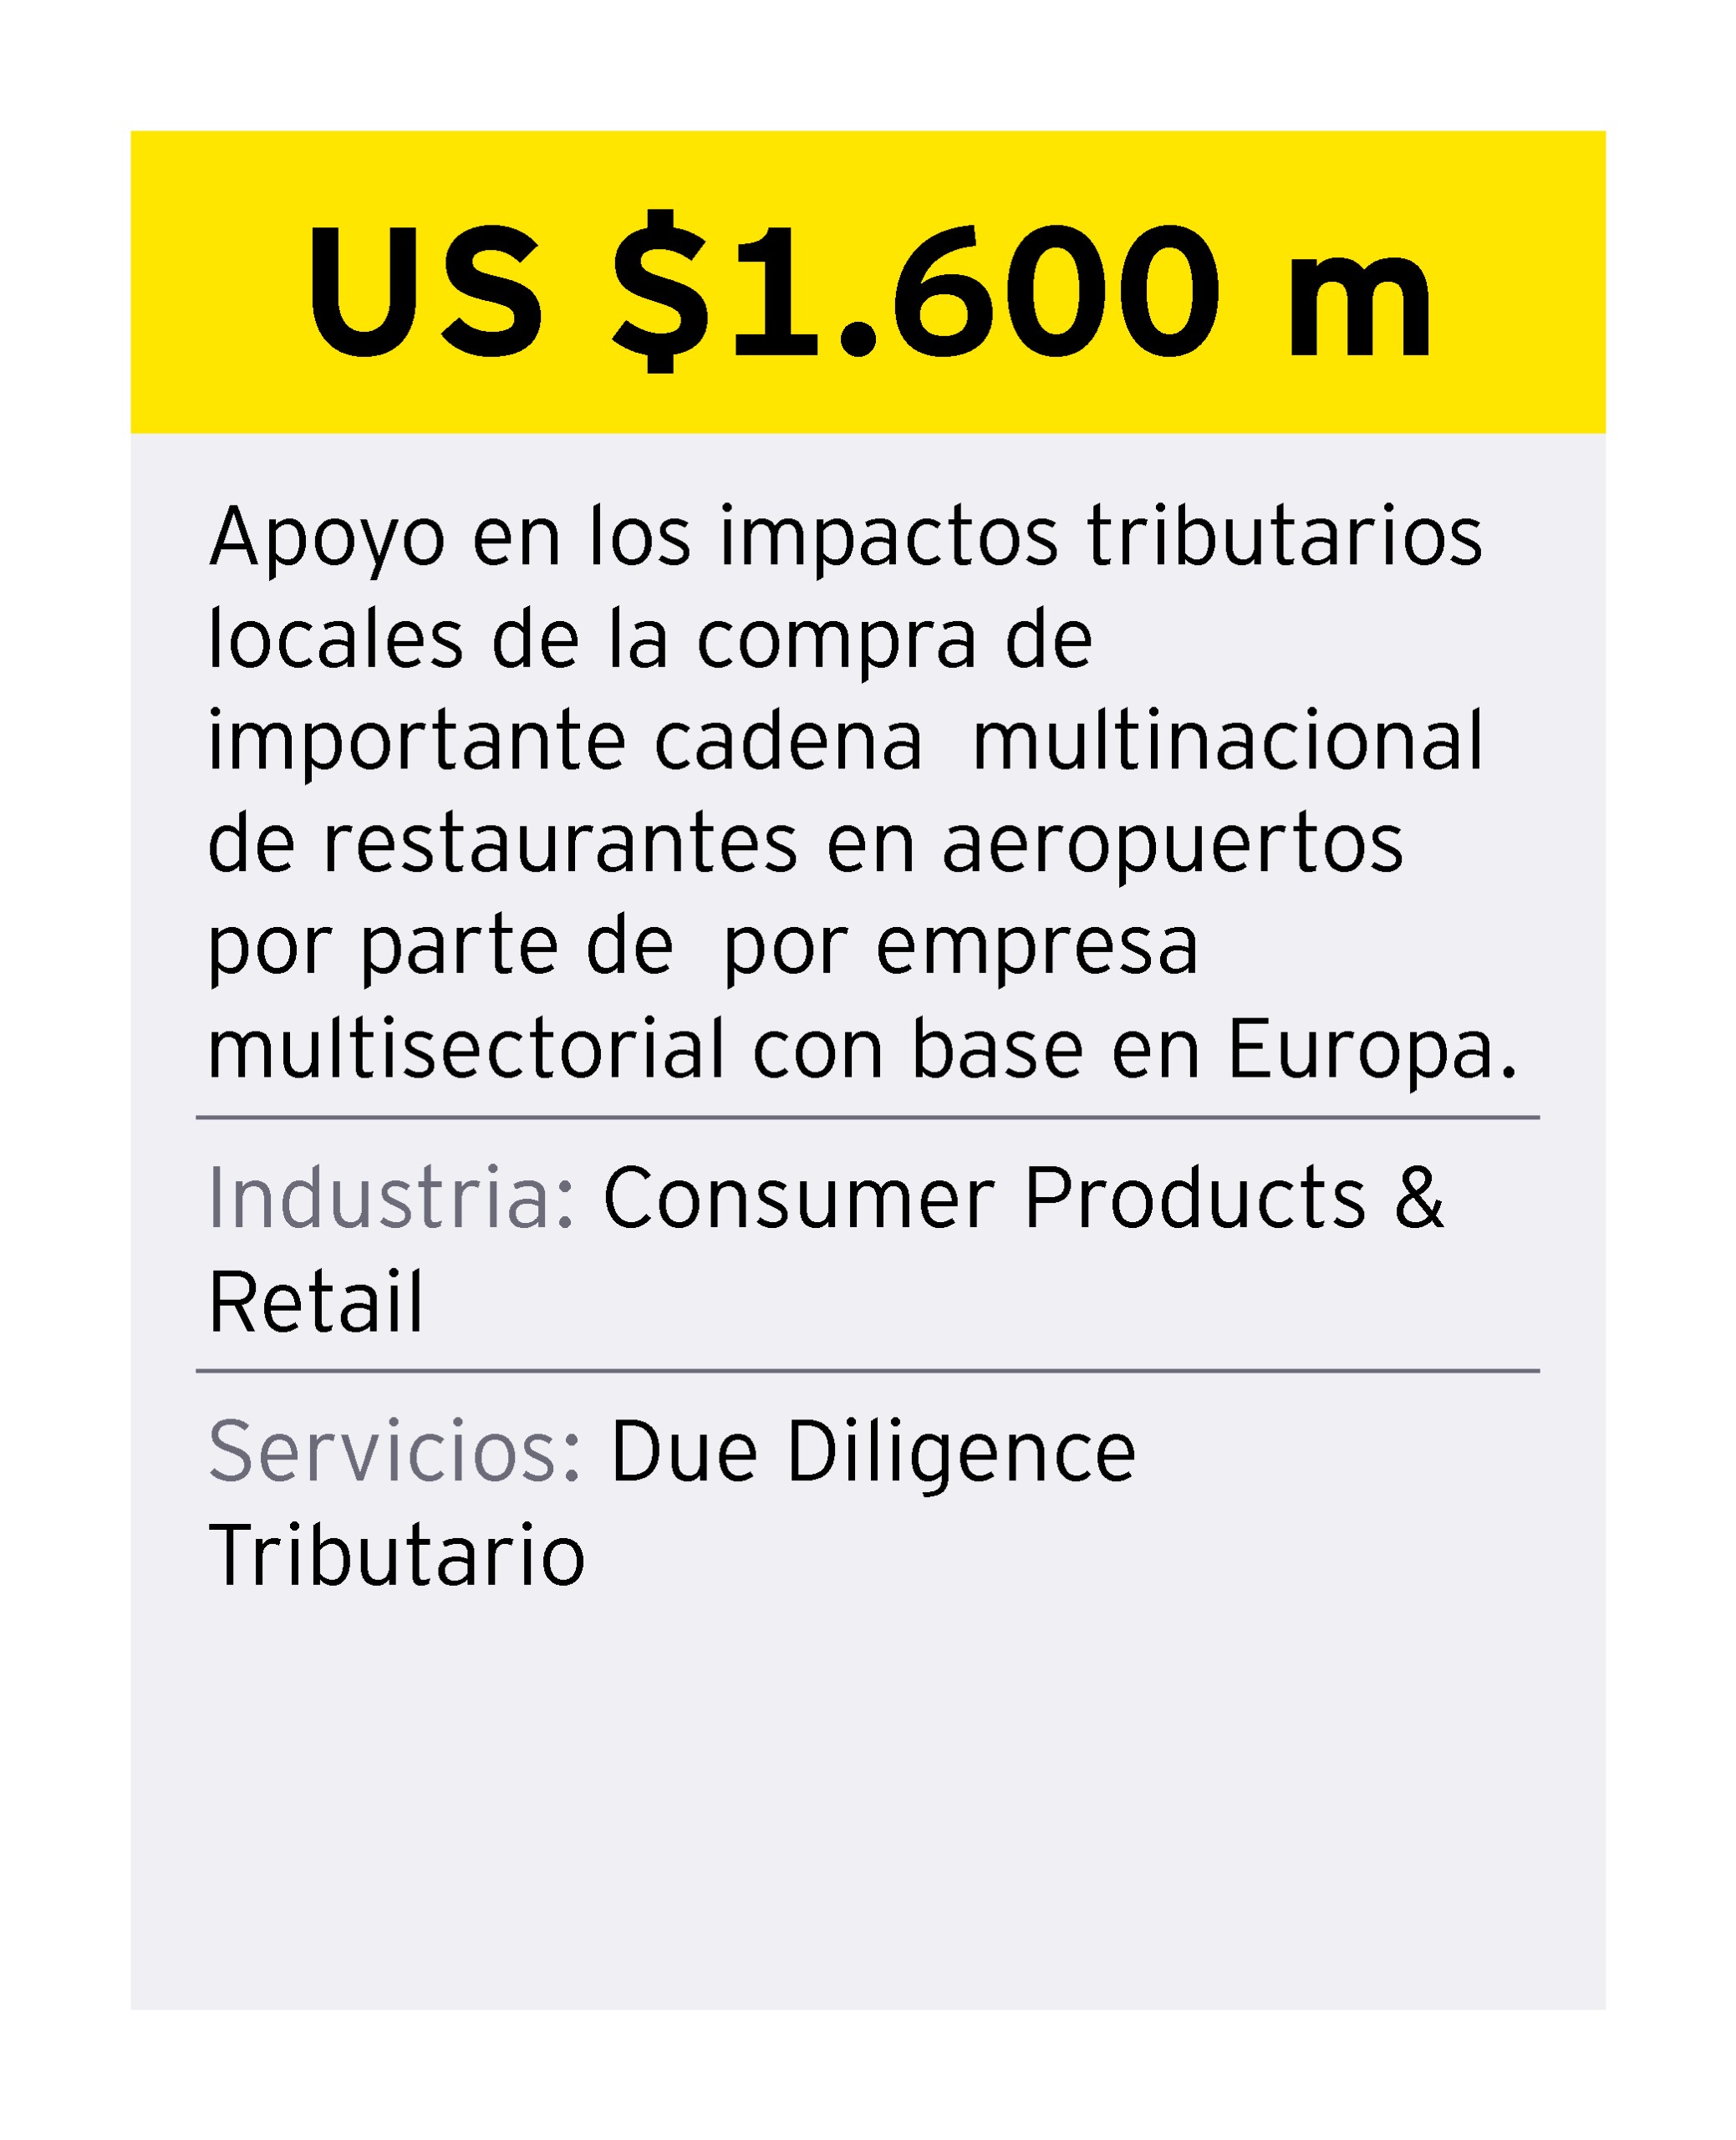 ey-chile-credencial-2-advanced-manufacturing